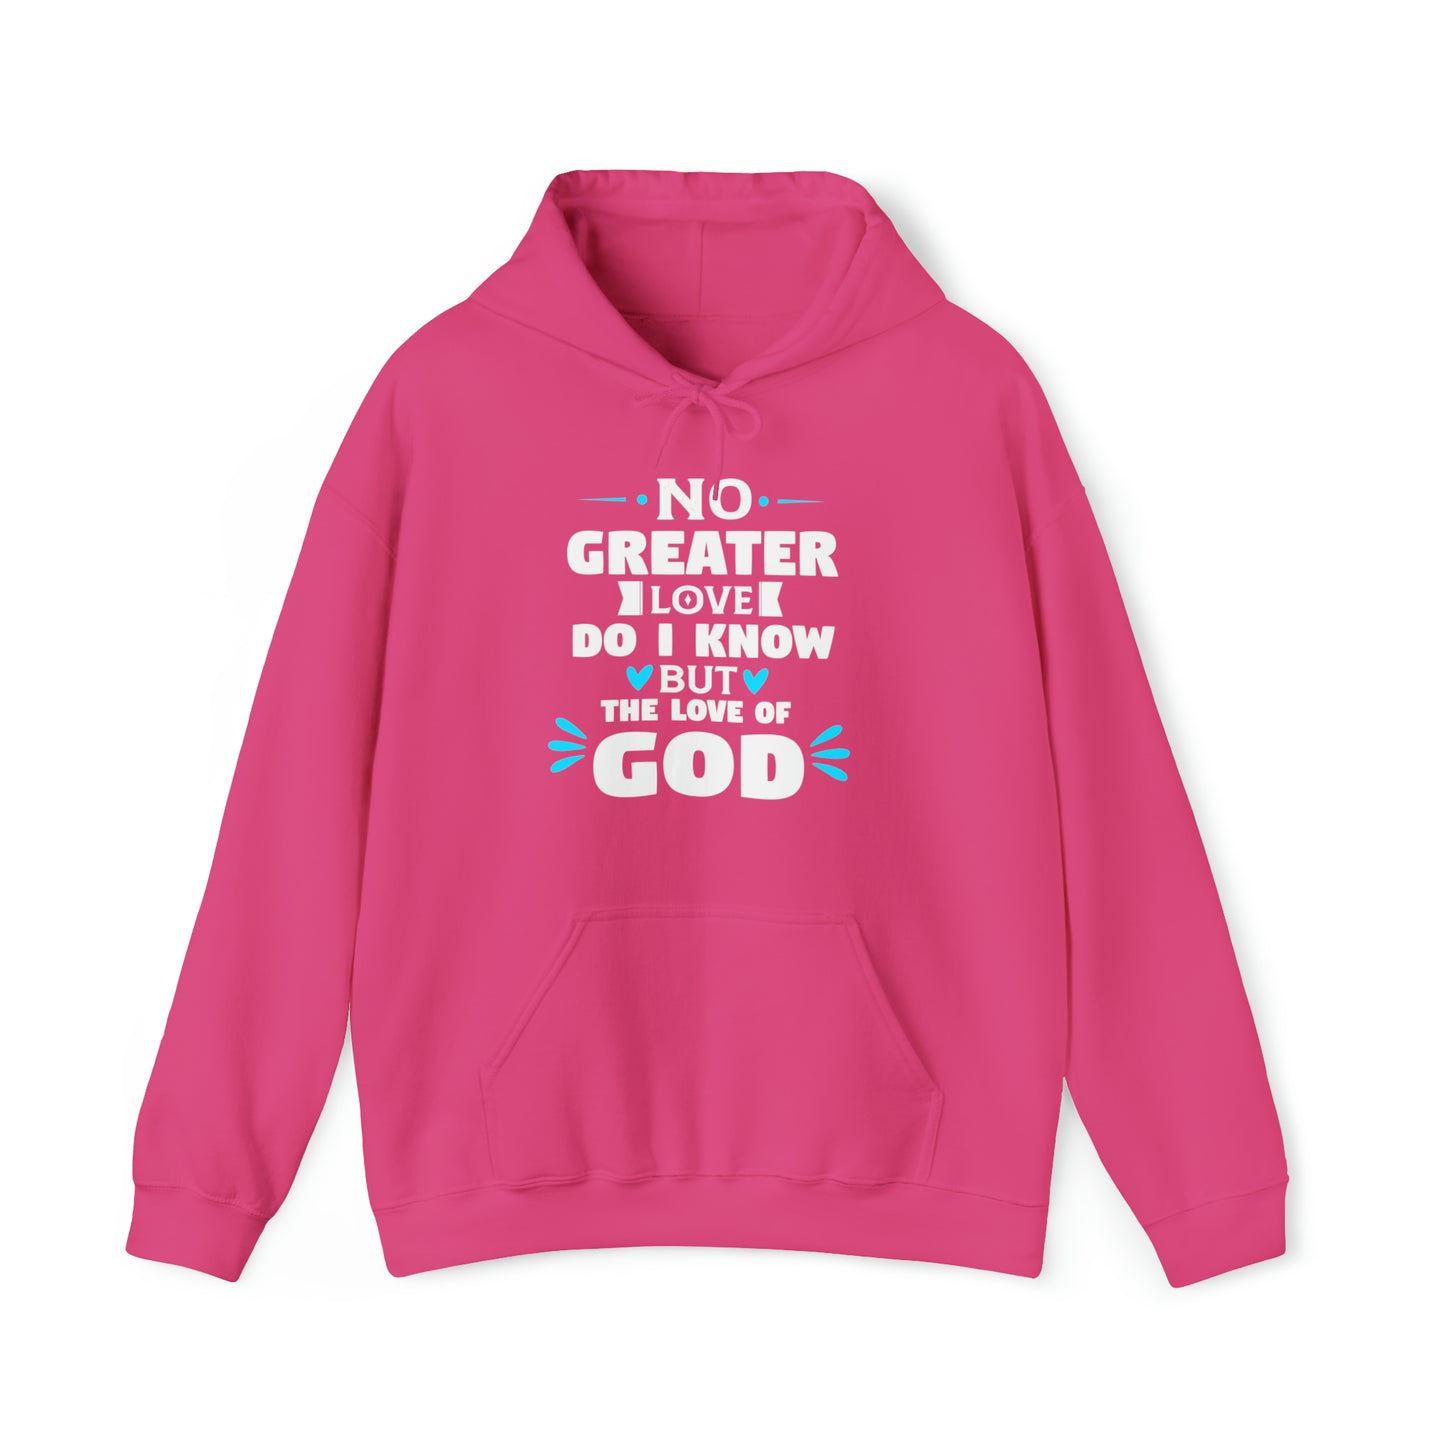 No Greater Love Do I Know But The Love Of God  Unisex Hooded Sweatshirt